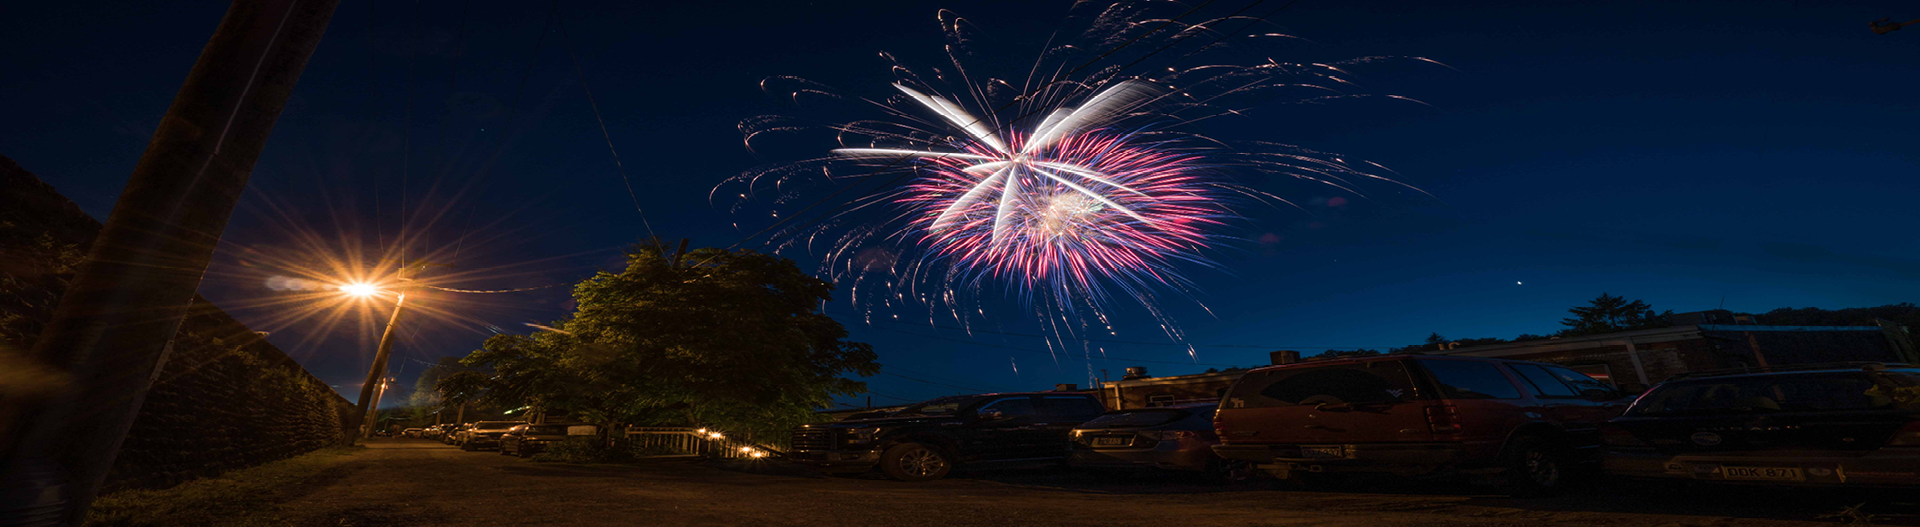 Events and Fun for The Fourth of July